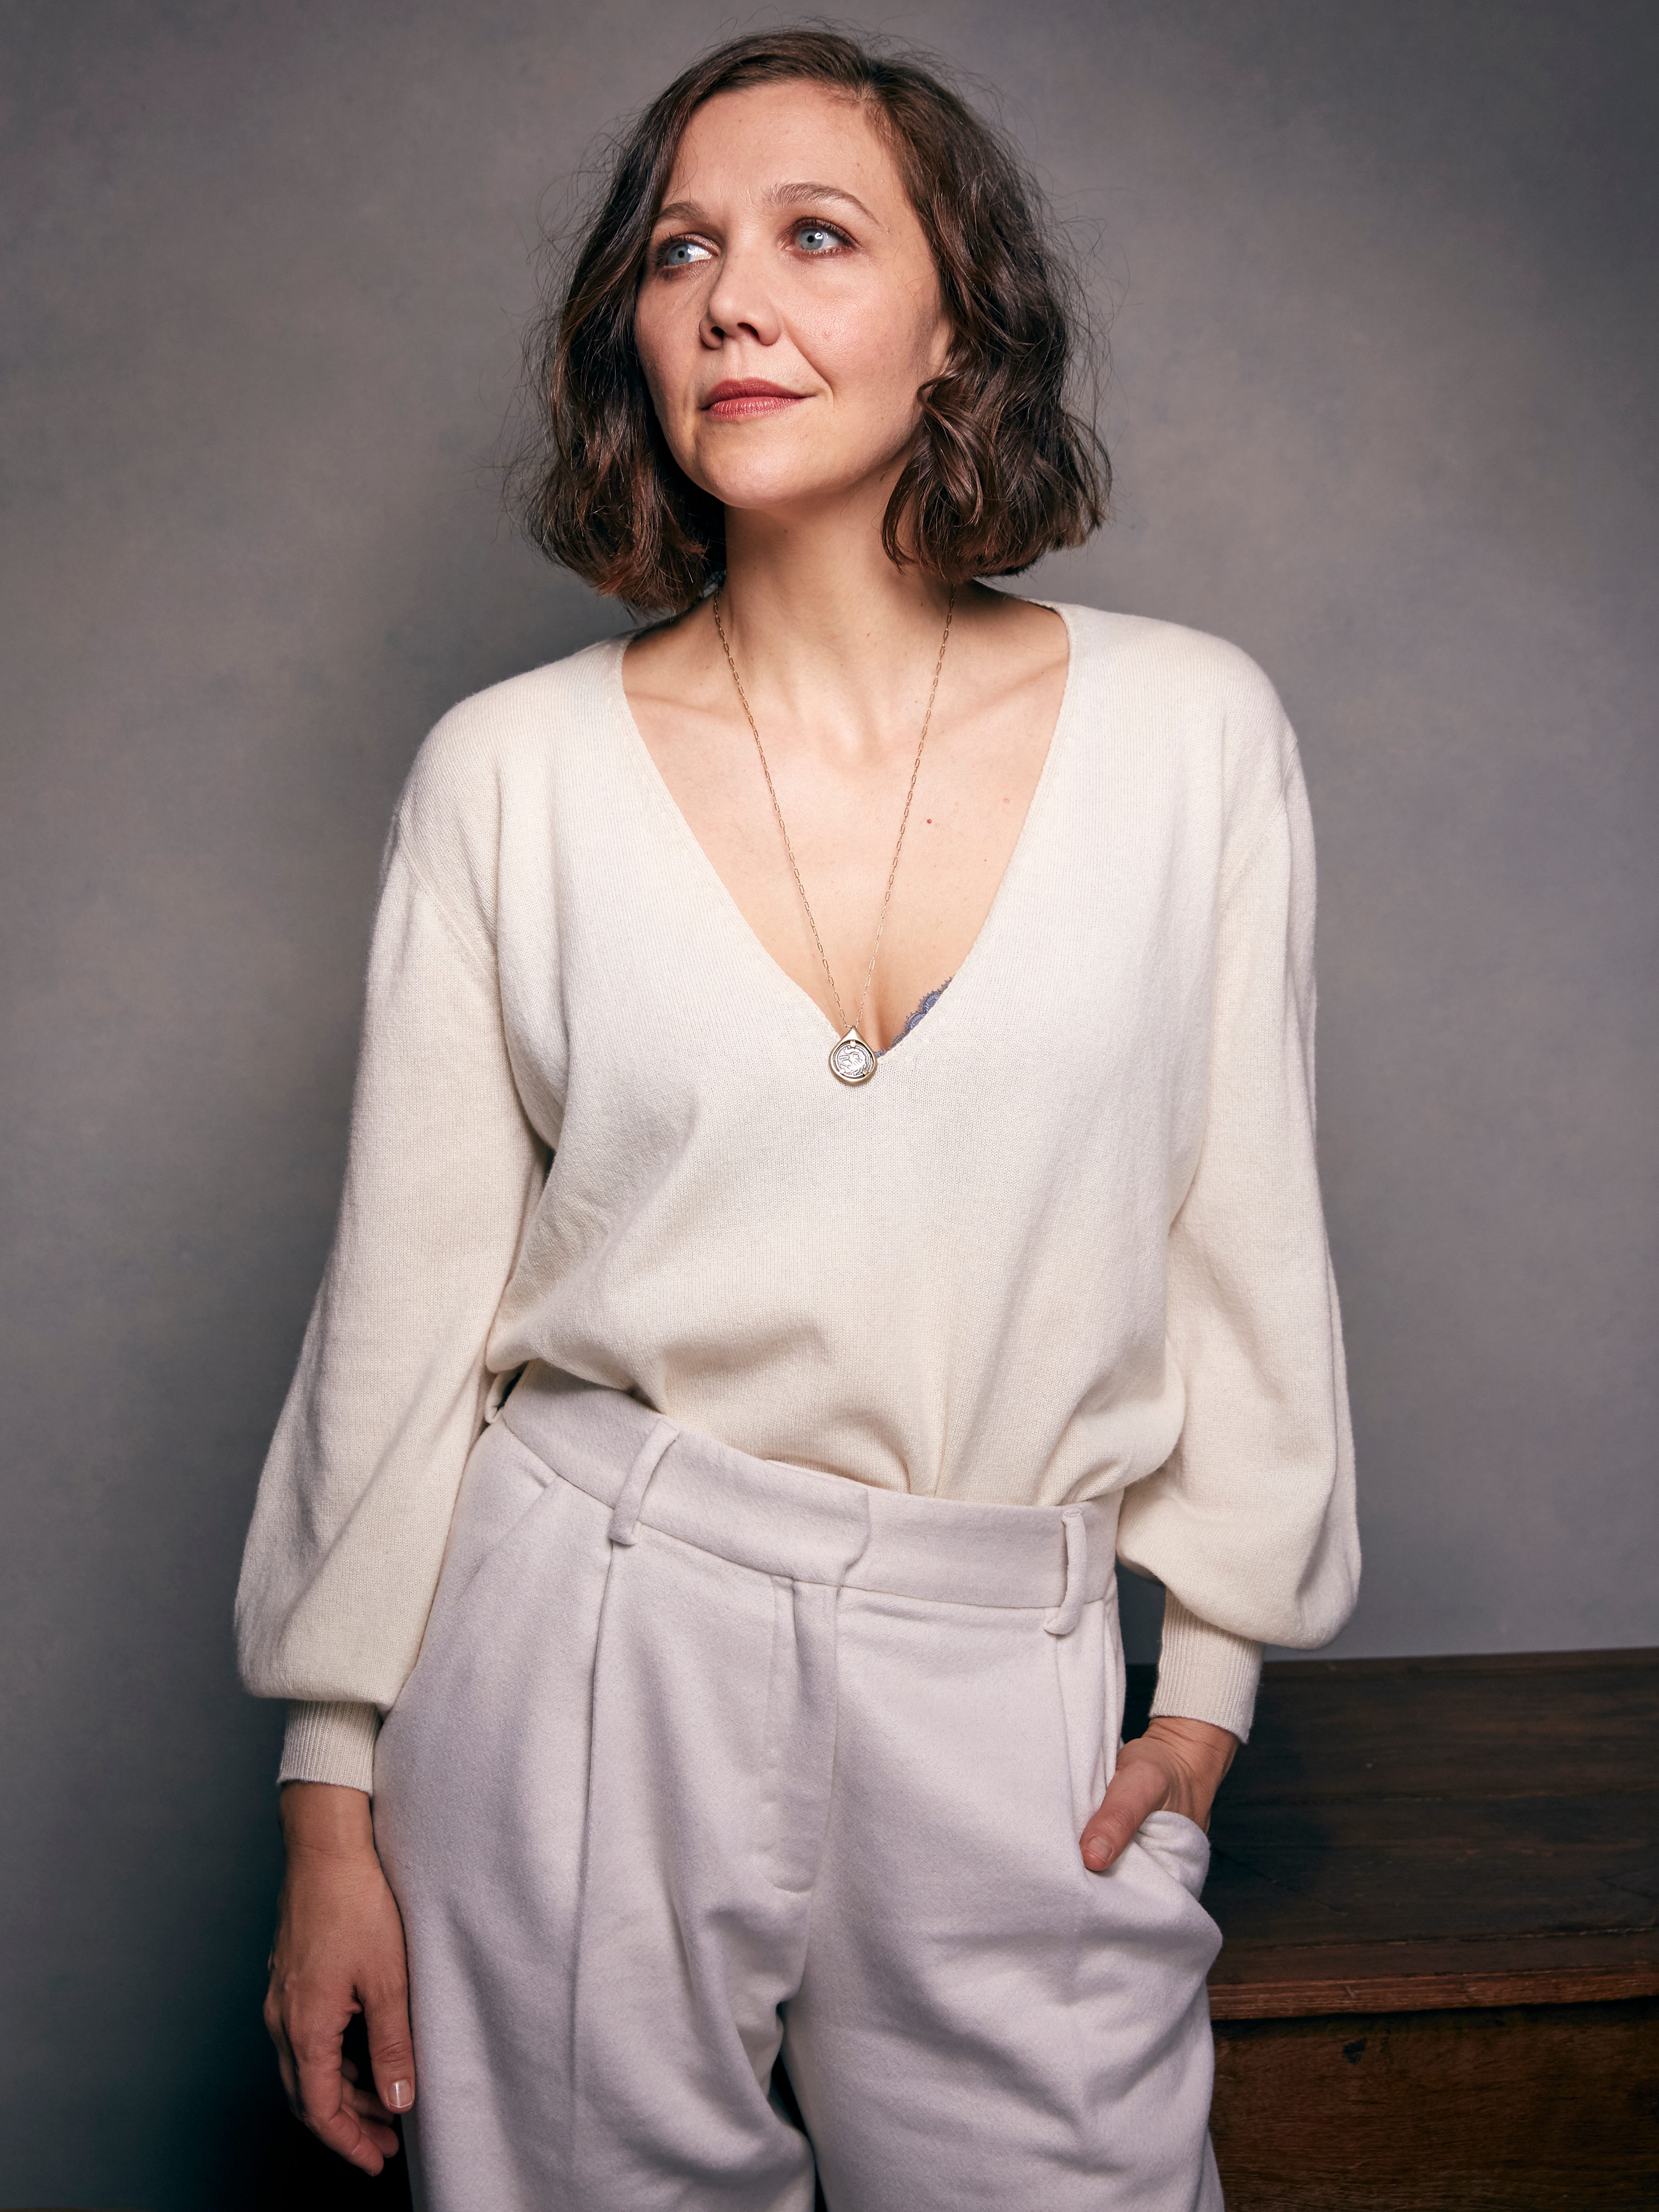 Maggie Gyllenhaal worked with women to make 'The ...